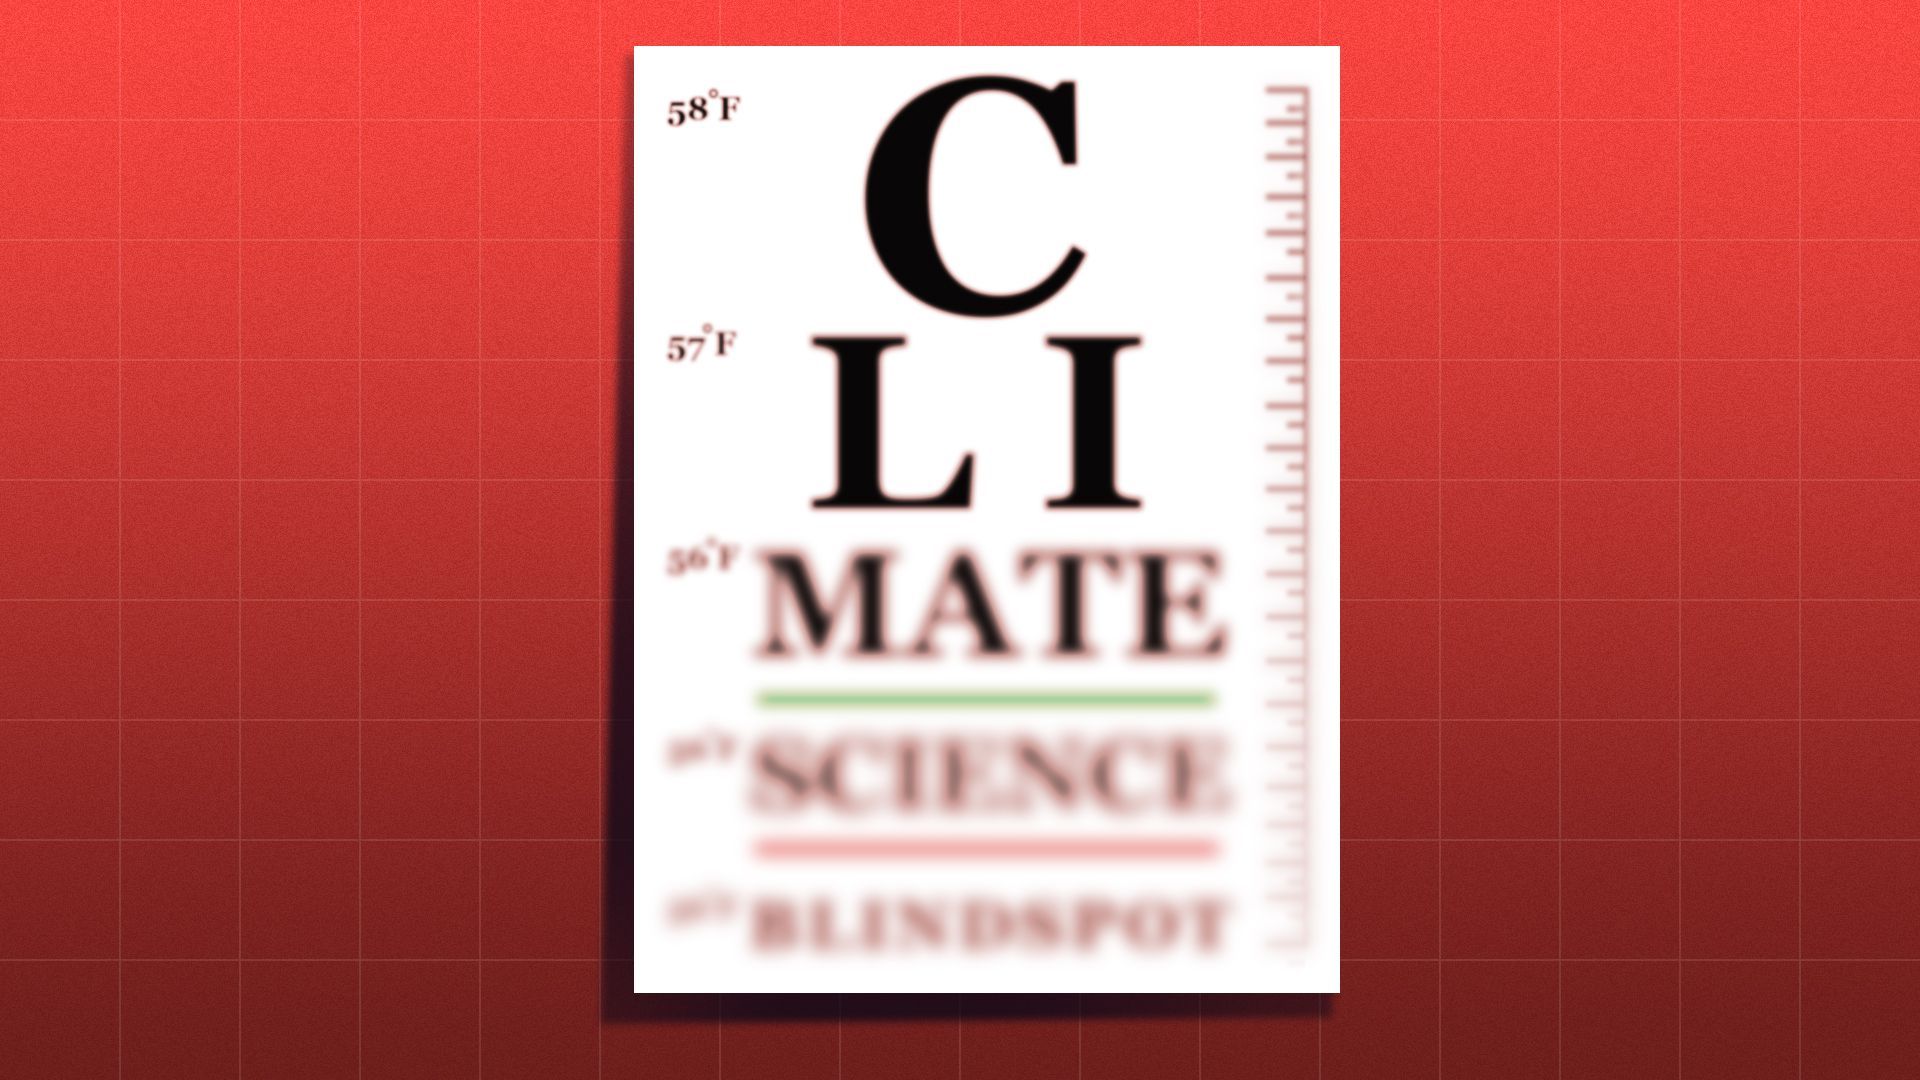 Illustration of a eye chart that reads "climate science blindspot"